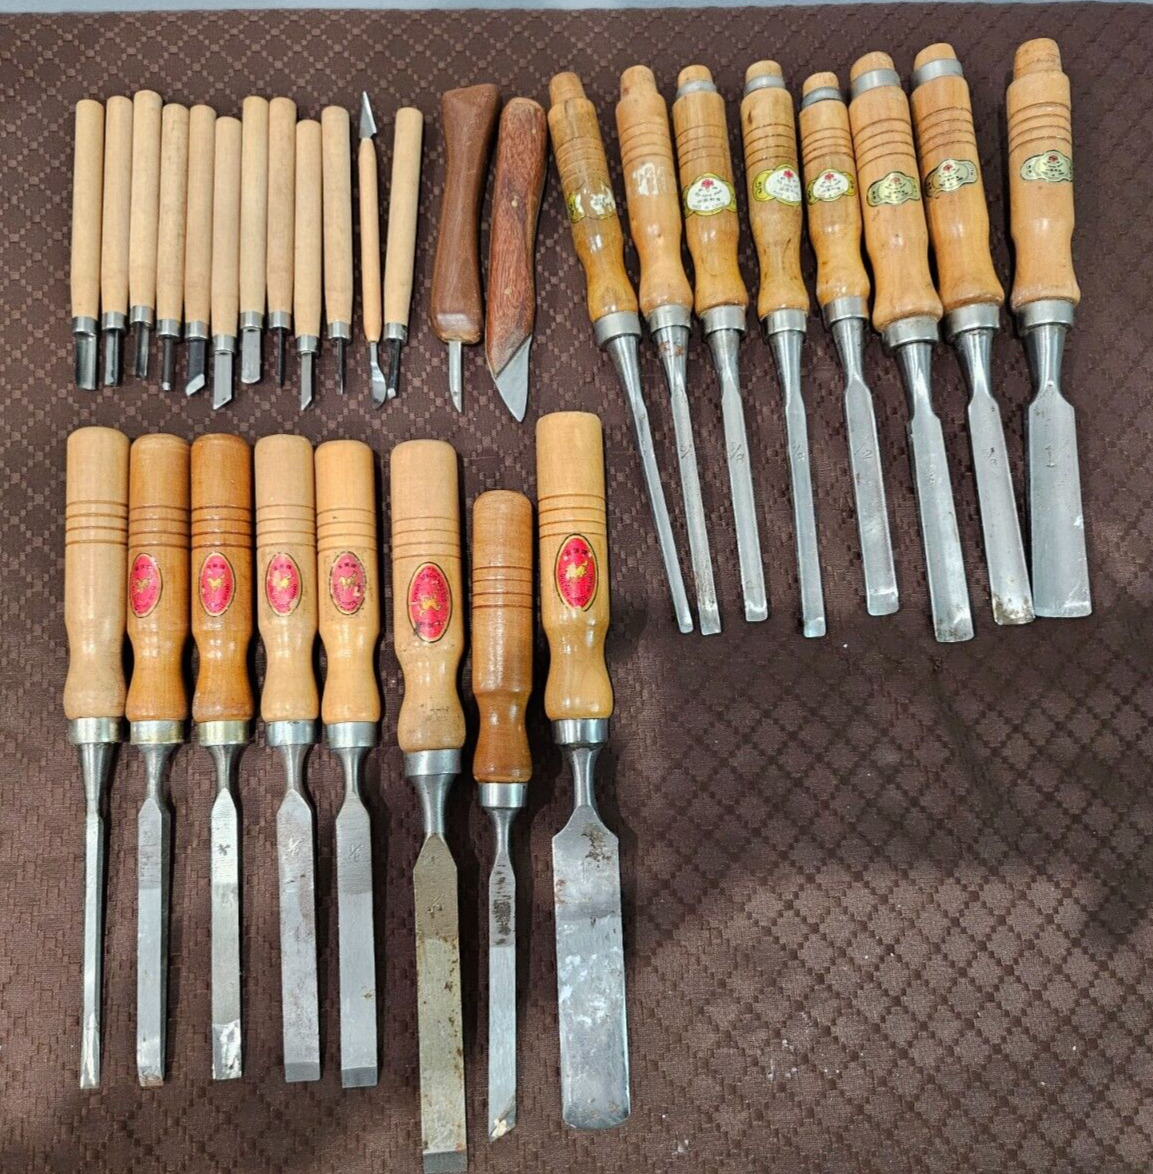 Wood Working Chisels Various Brands Sizes and shapes Lot of 30 Pieces